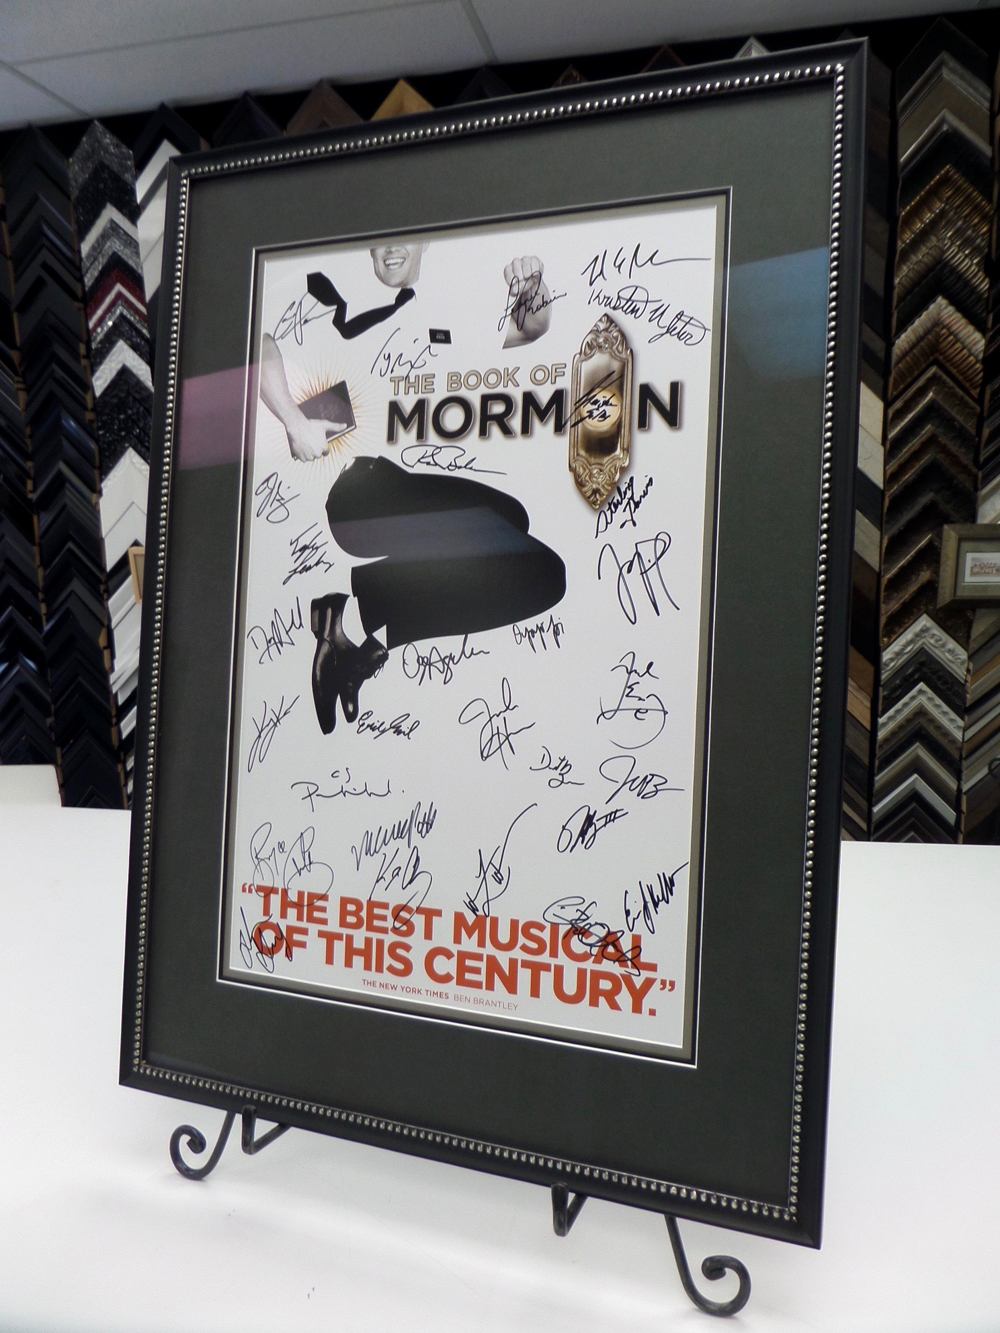 an image with signatures in a frame